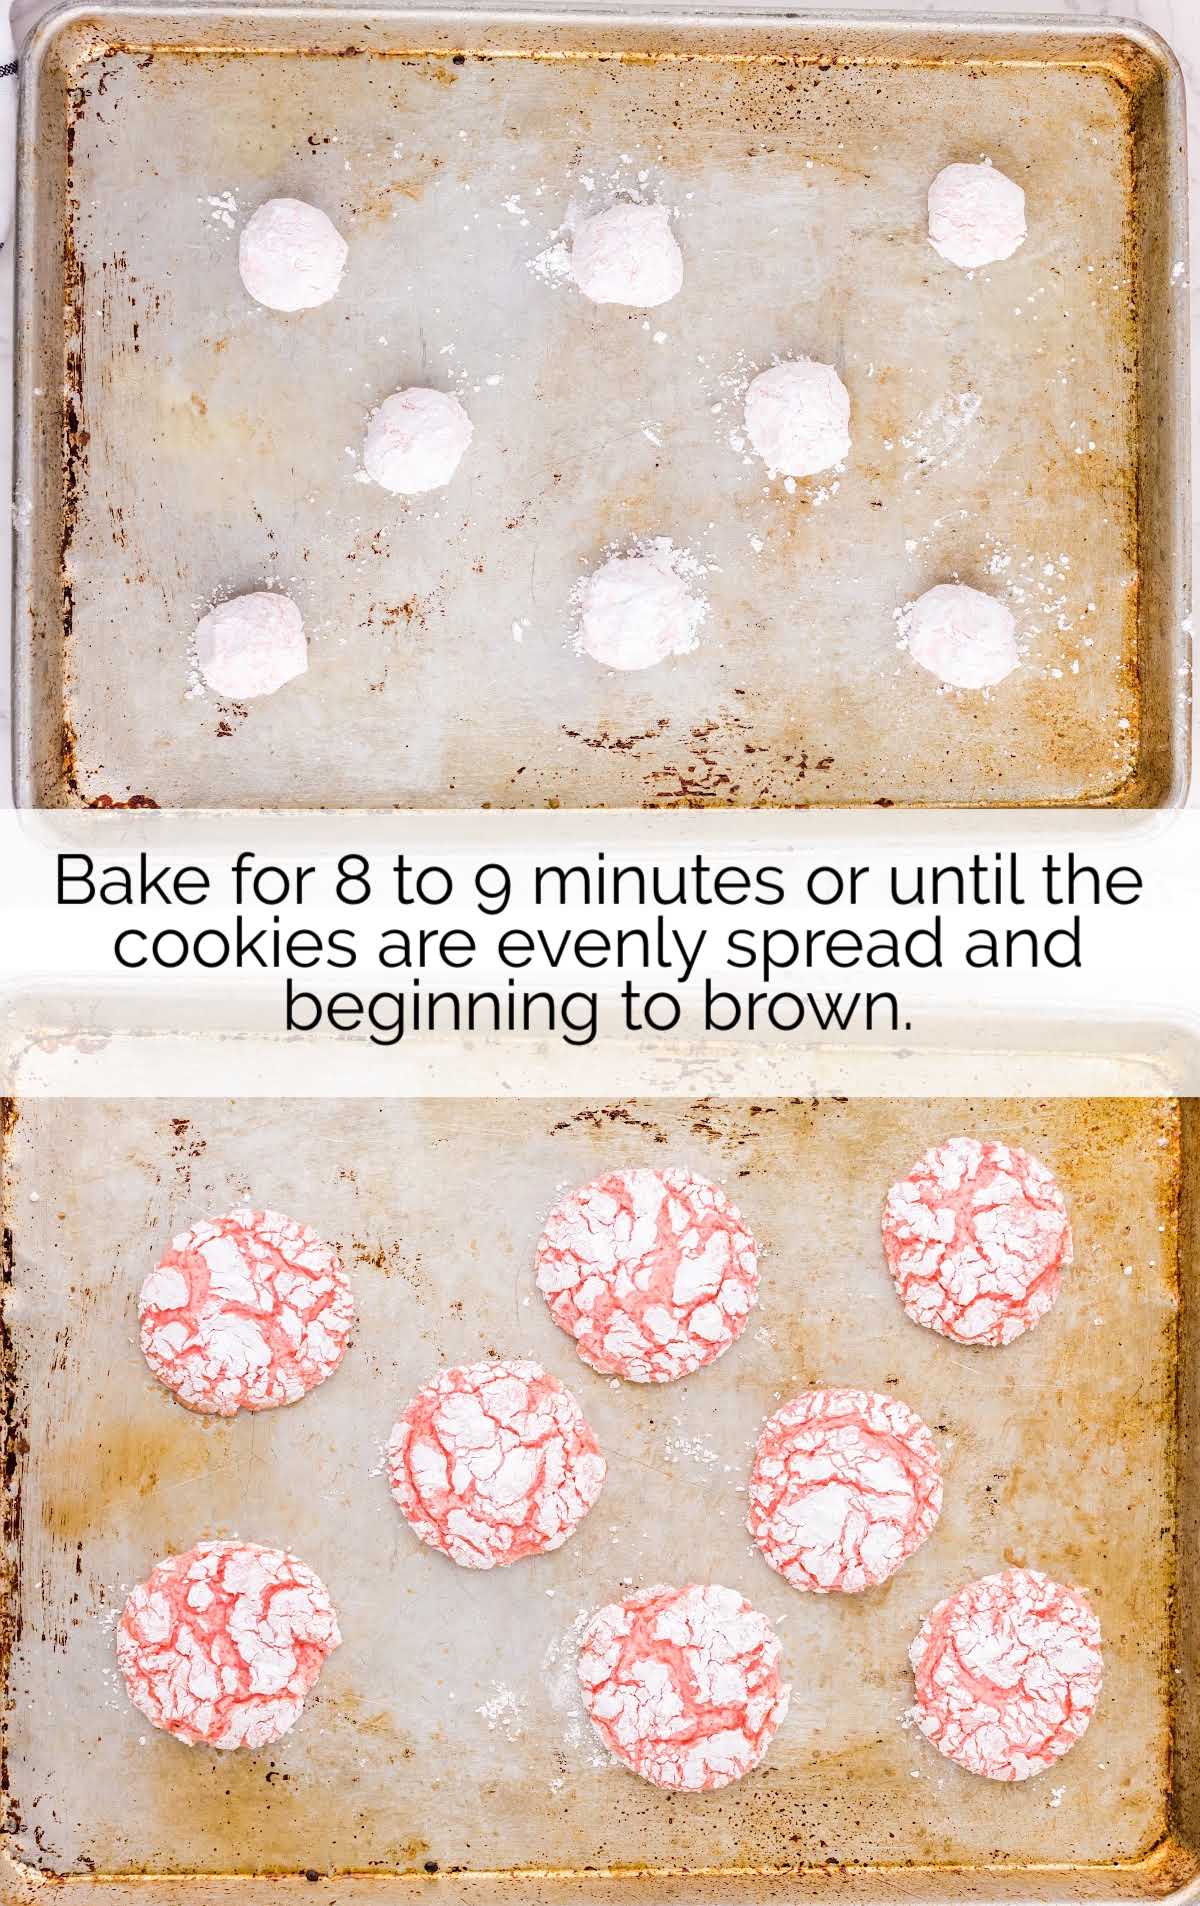 baked cookies in a baking tray